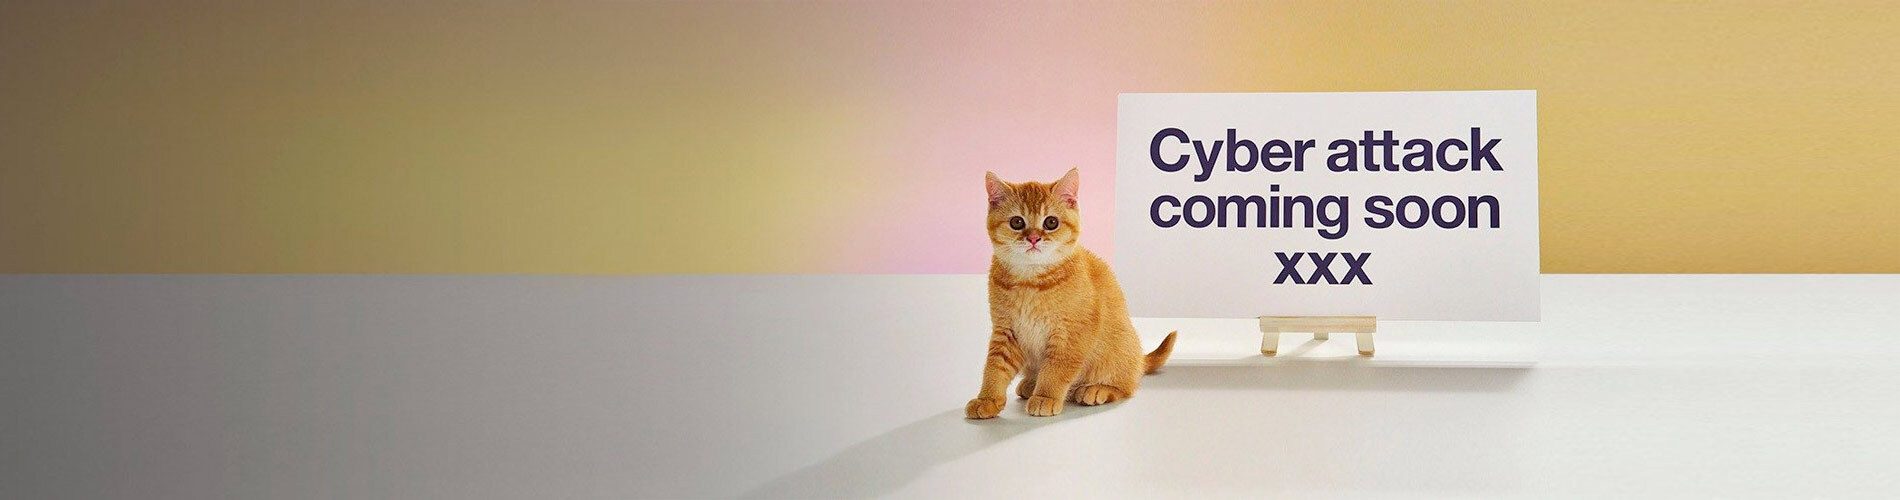 Kitten sitting by 'Cyber attack coming soon xxx' sign